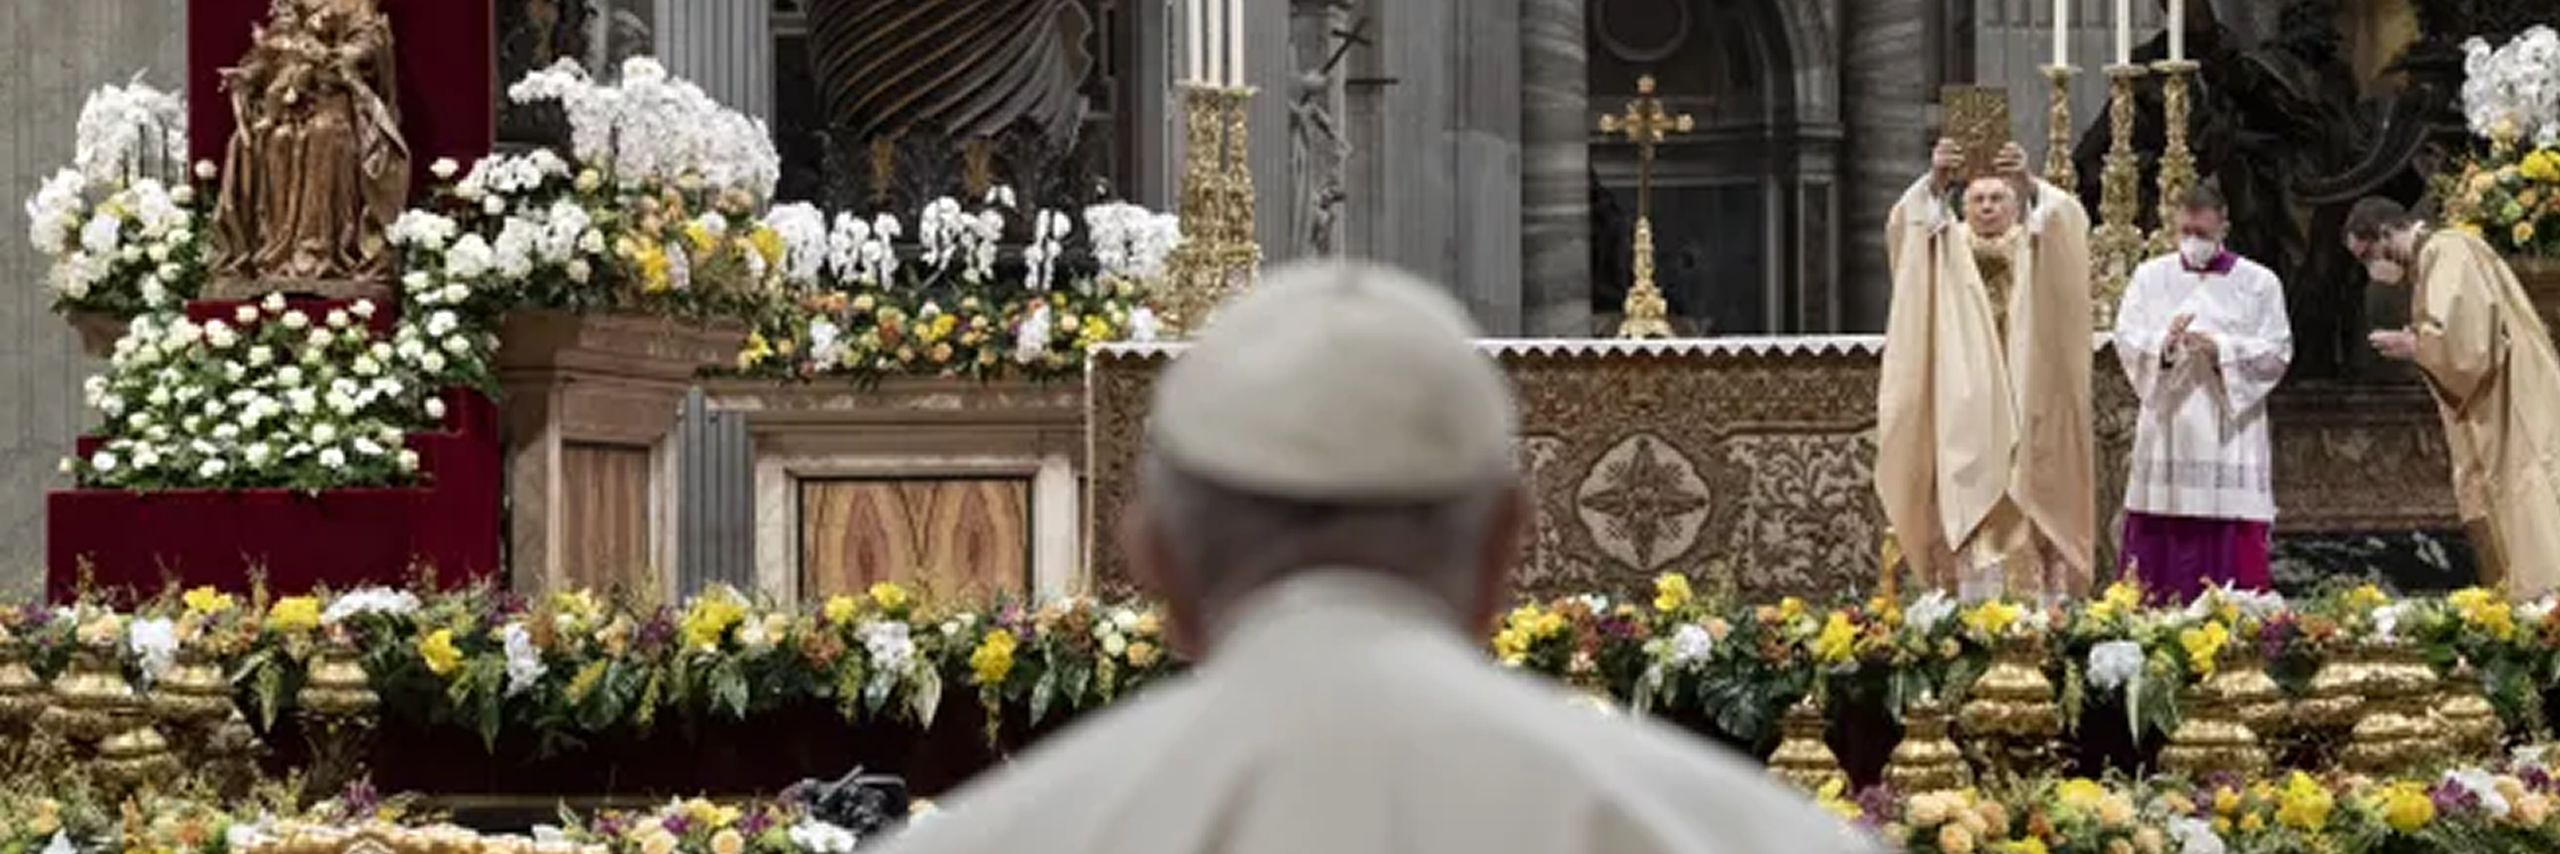 POPE FRANCIS' HOMILY FOR EASTER 